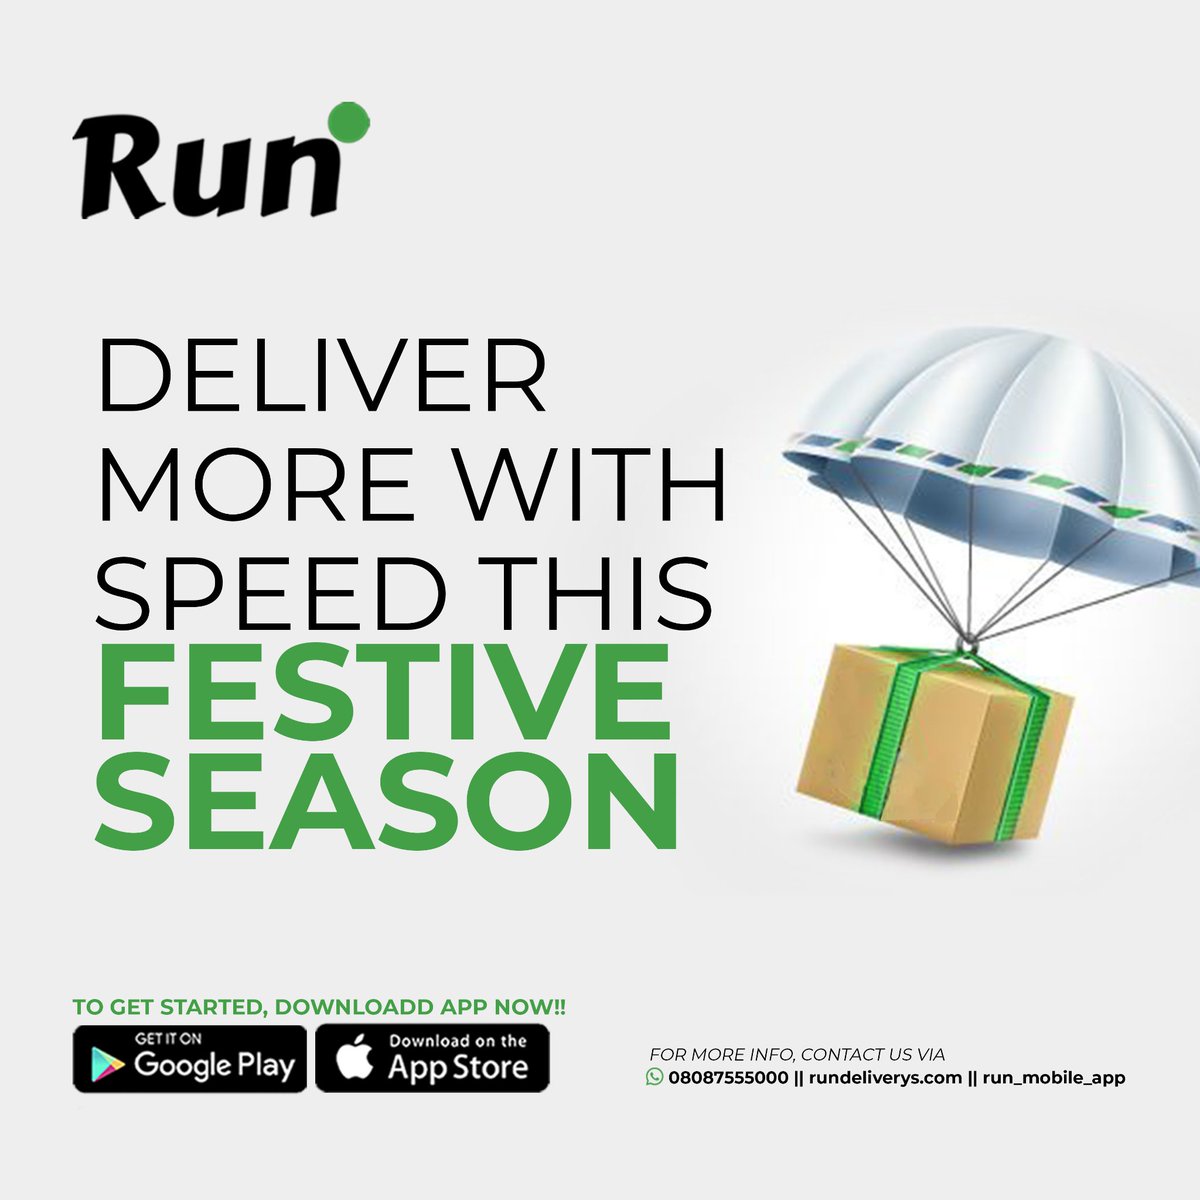 Deliver more with speed this festive season.
Worry less, Run more!!!
#happyholidays #logisticsmanagement #logisticsinlagos #ridersmanager #deliverwithease